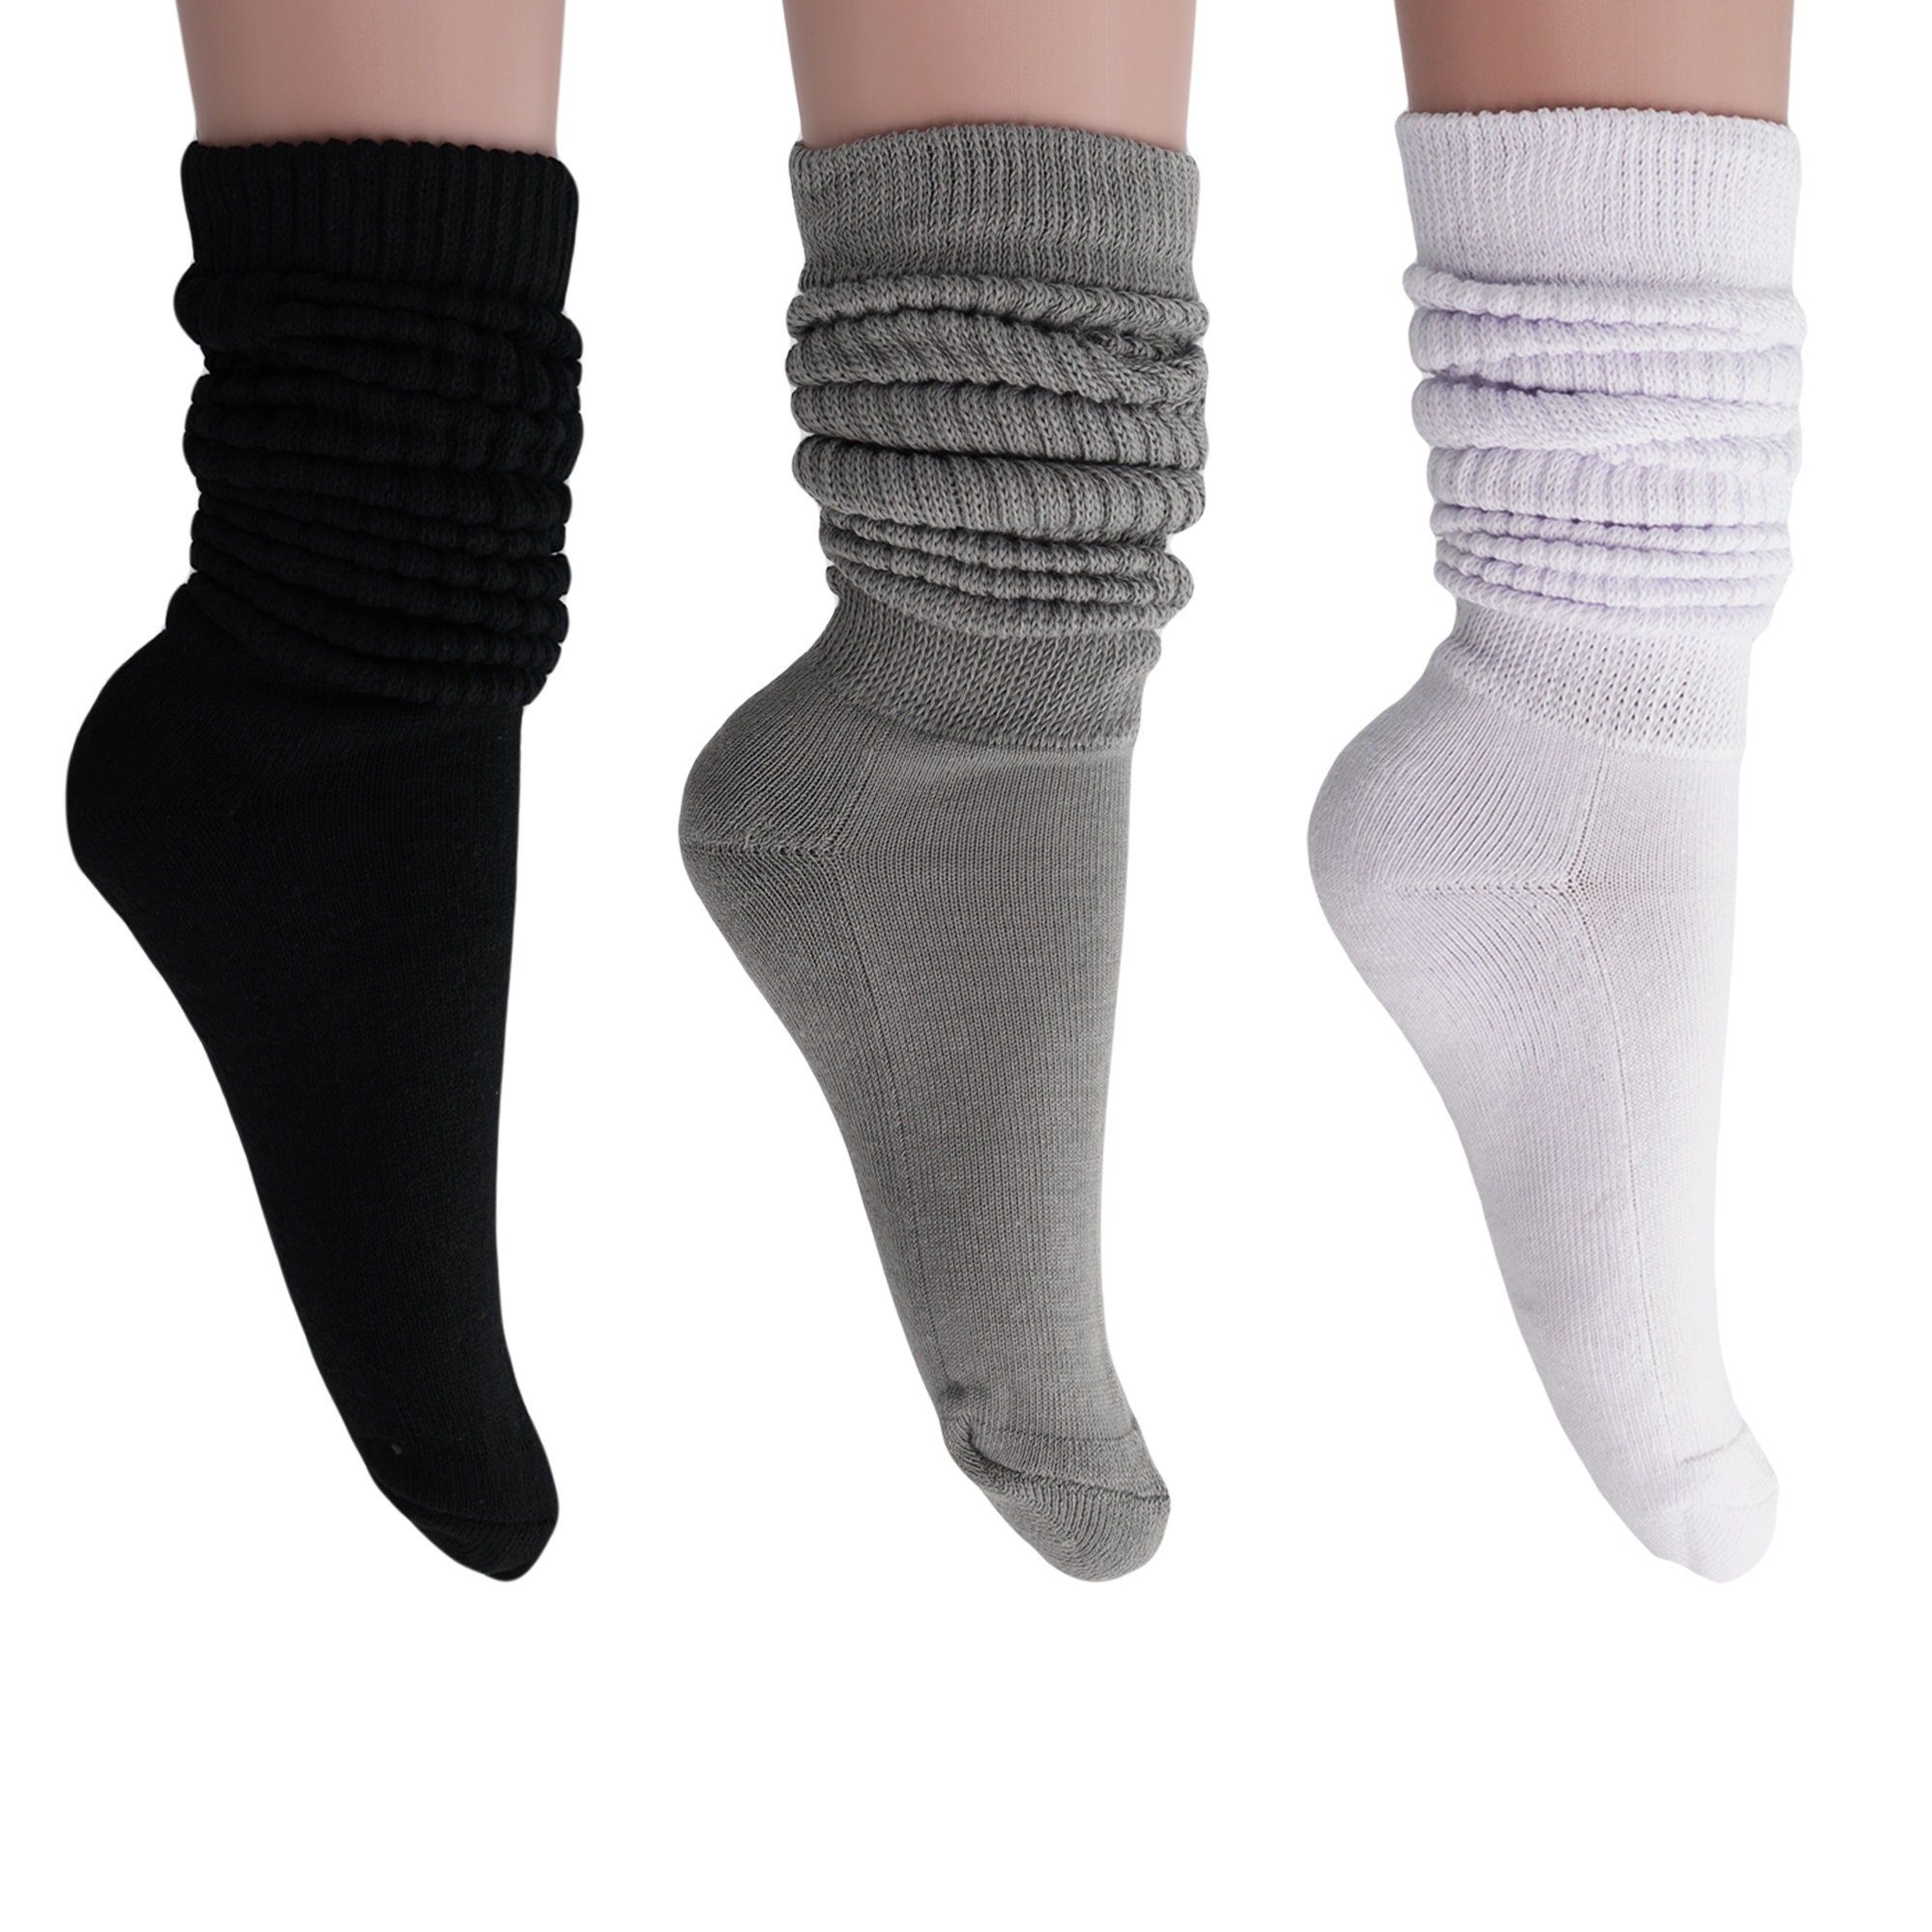 Super Thick Cotton WHITE Lace Slouch Socks Women, Hooter's Style Scrunchy  Slouch Socks Lace, USA MADE Quality, Fun Cute Hosiery Fashion -  Canada